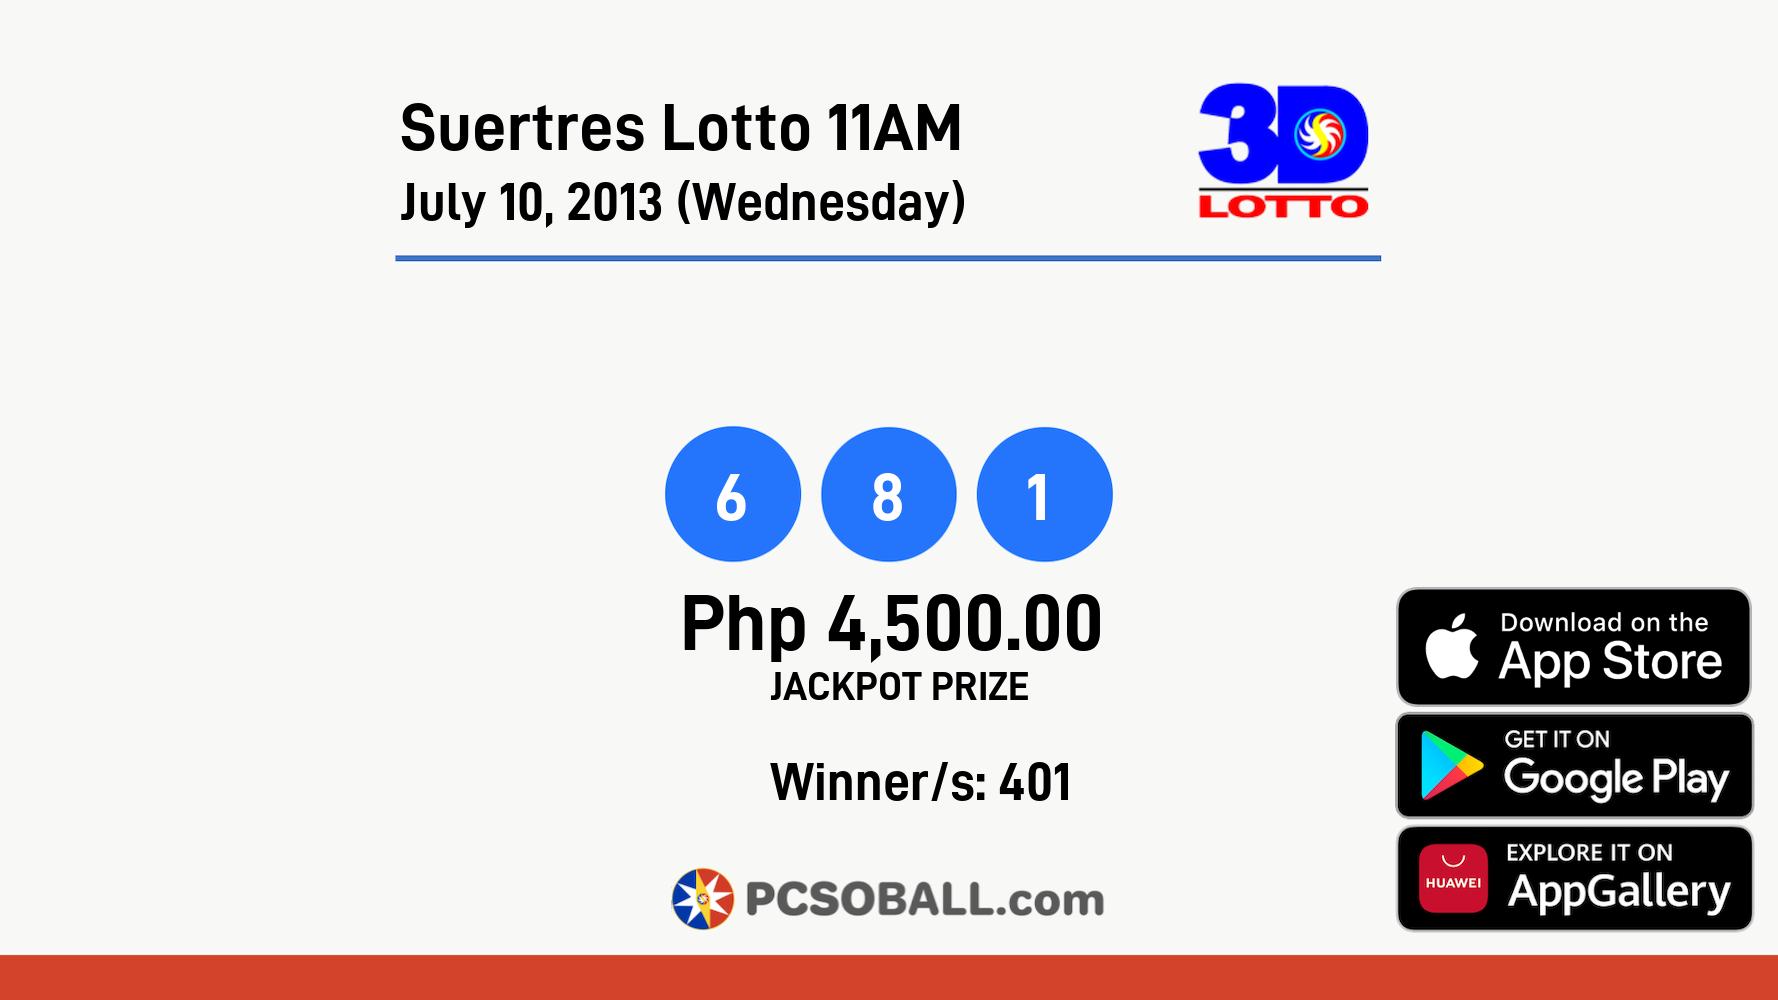 Suertres Lotto 11AM July 10, 2013 (Wednesday) Result